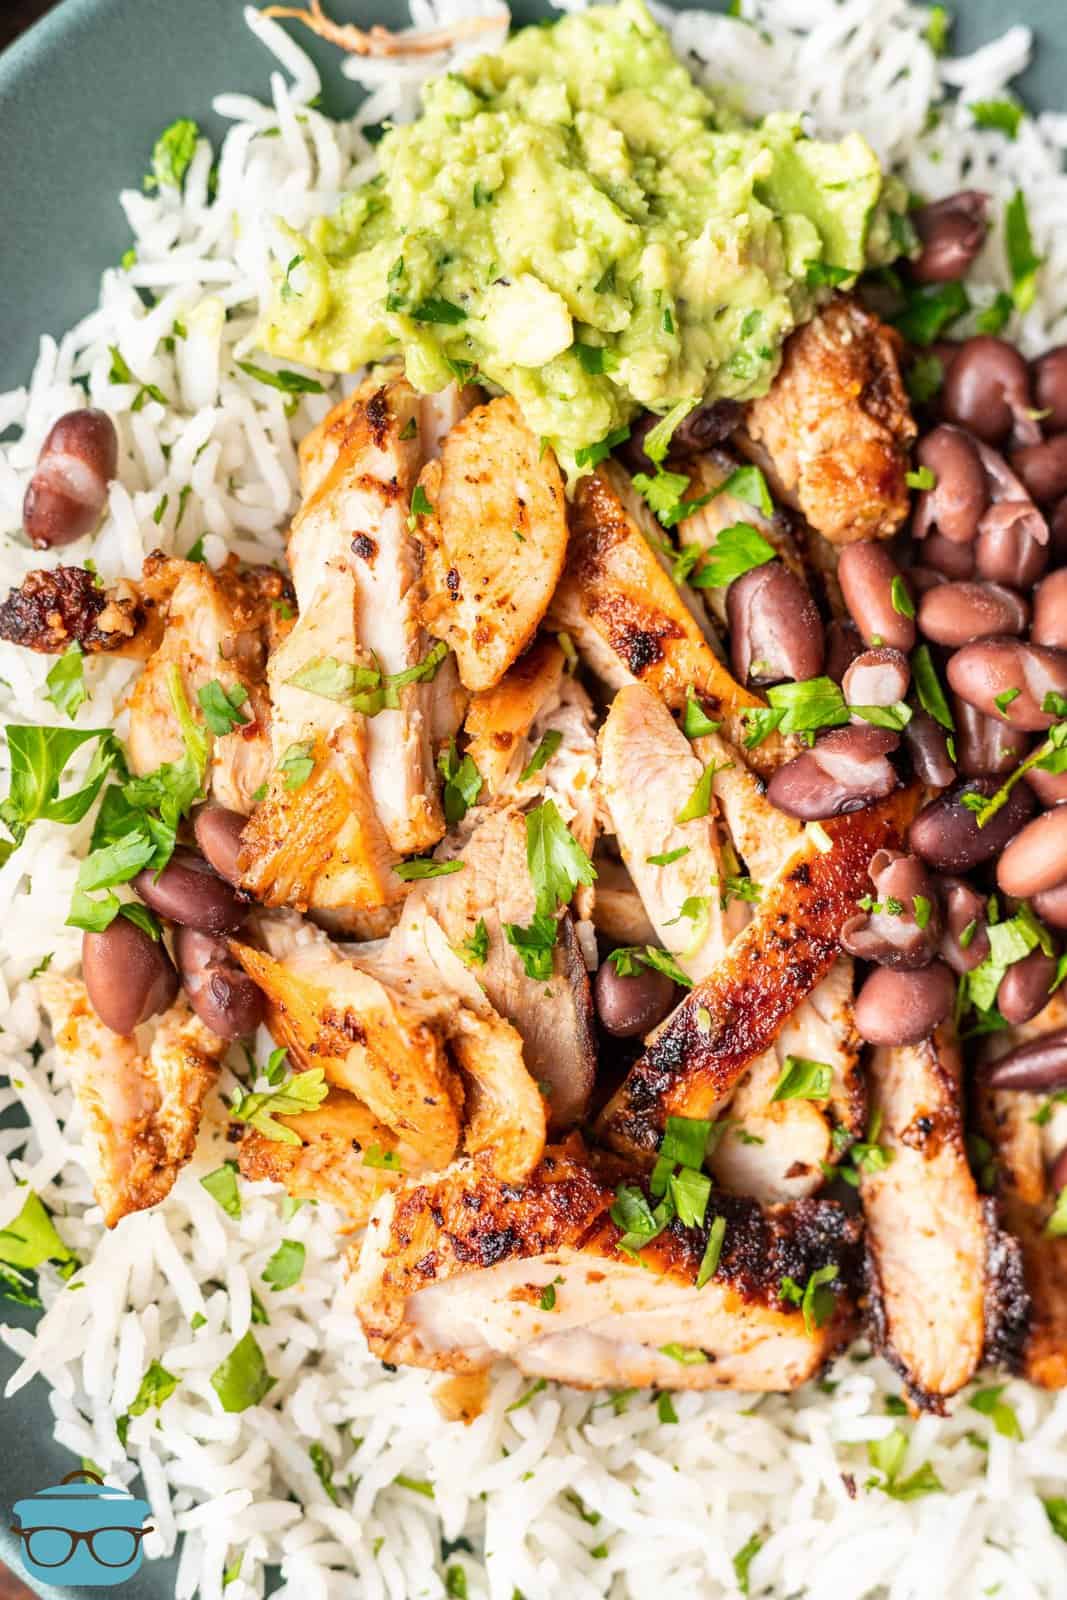 Looking down on a close up plate of rice, beans, and copycat chipotle chicken.